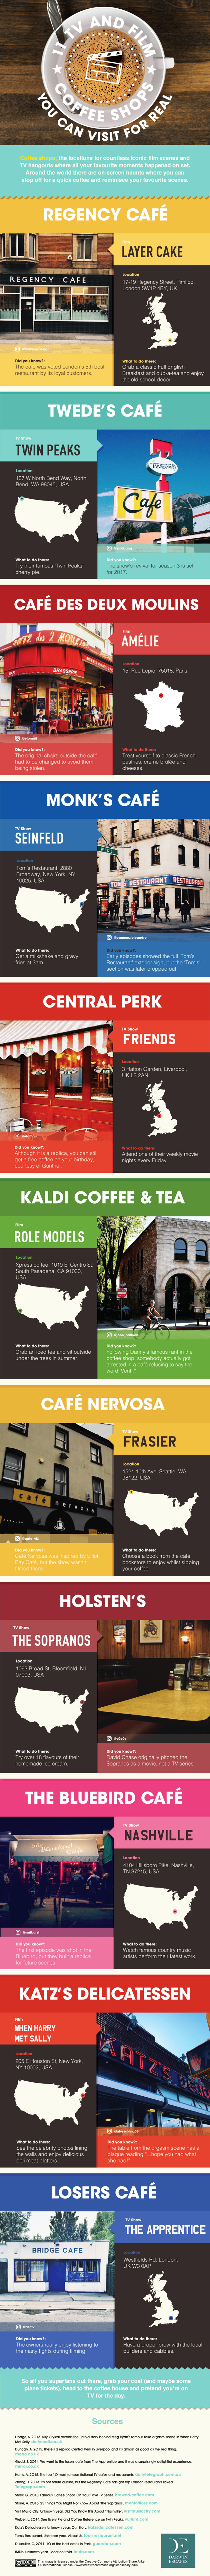 TV and Movie Coffee Shops You Can Dine For Real Infographic